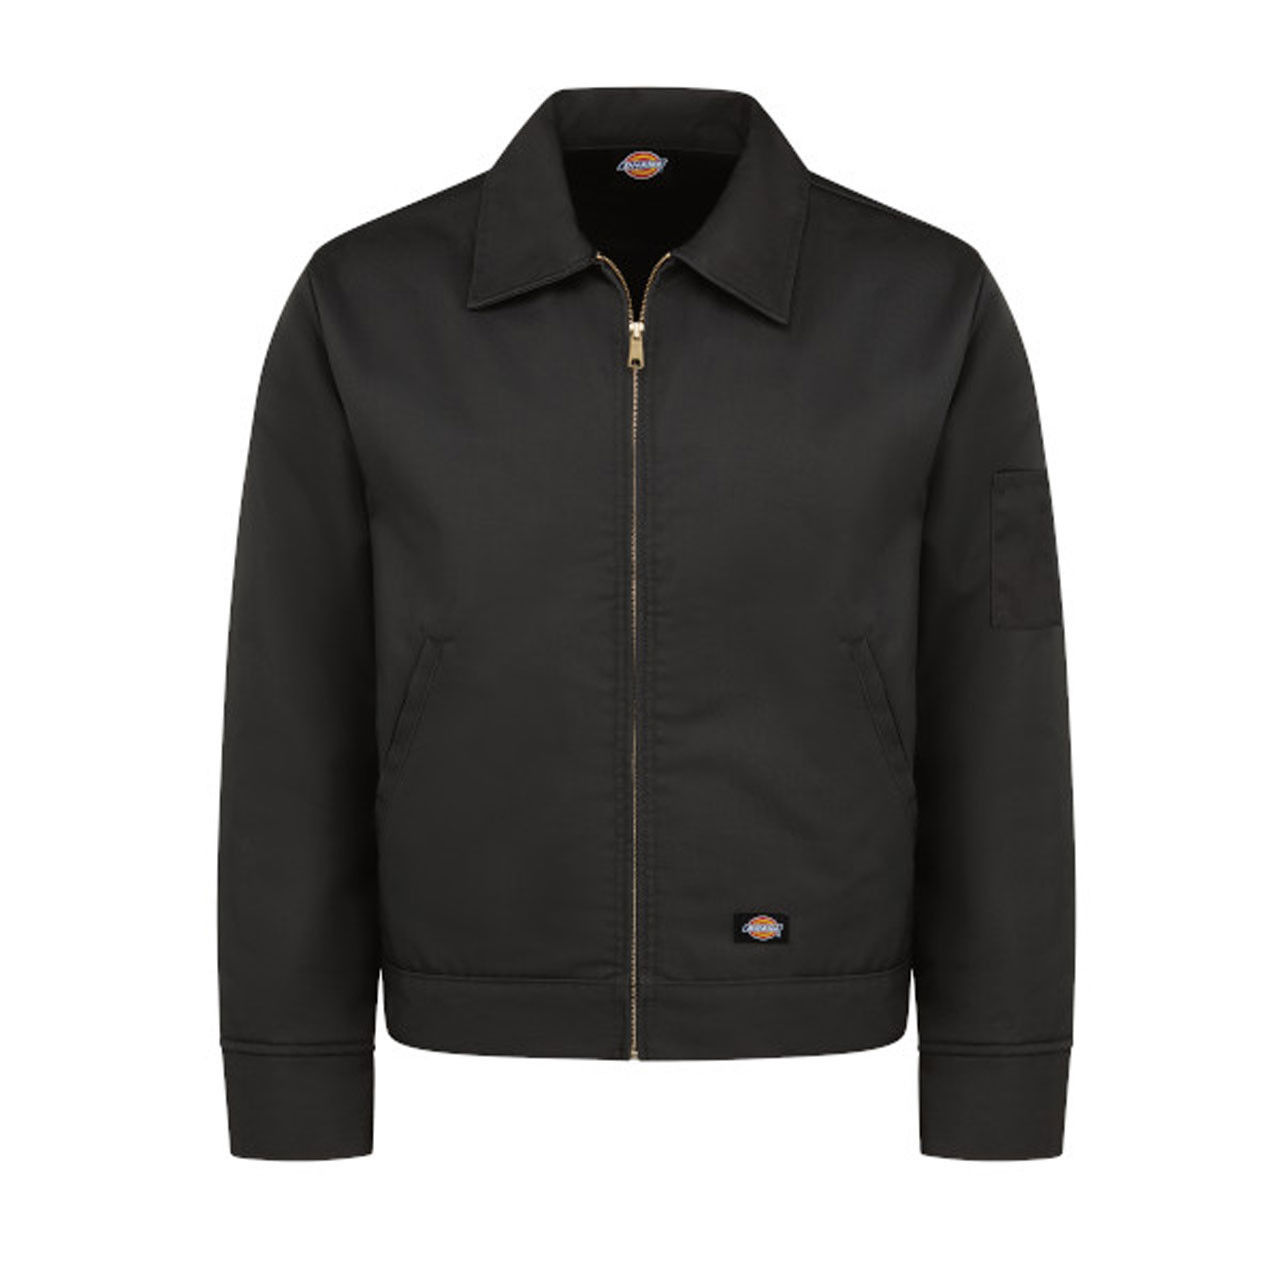 What type of zipper does the black Dickies jacket TJ55 have?